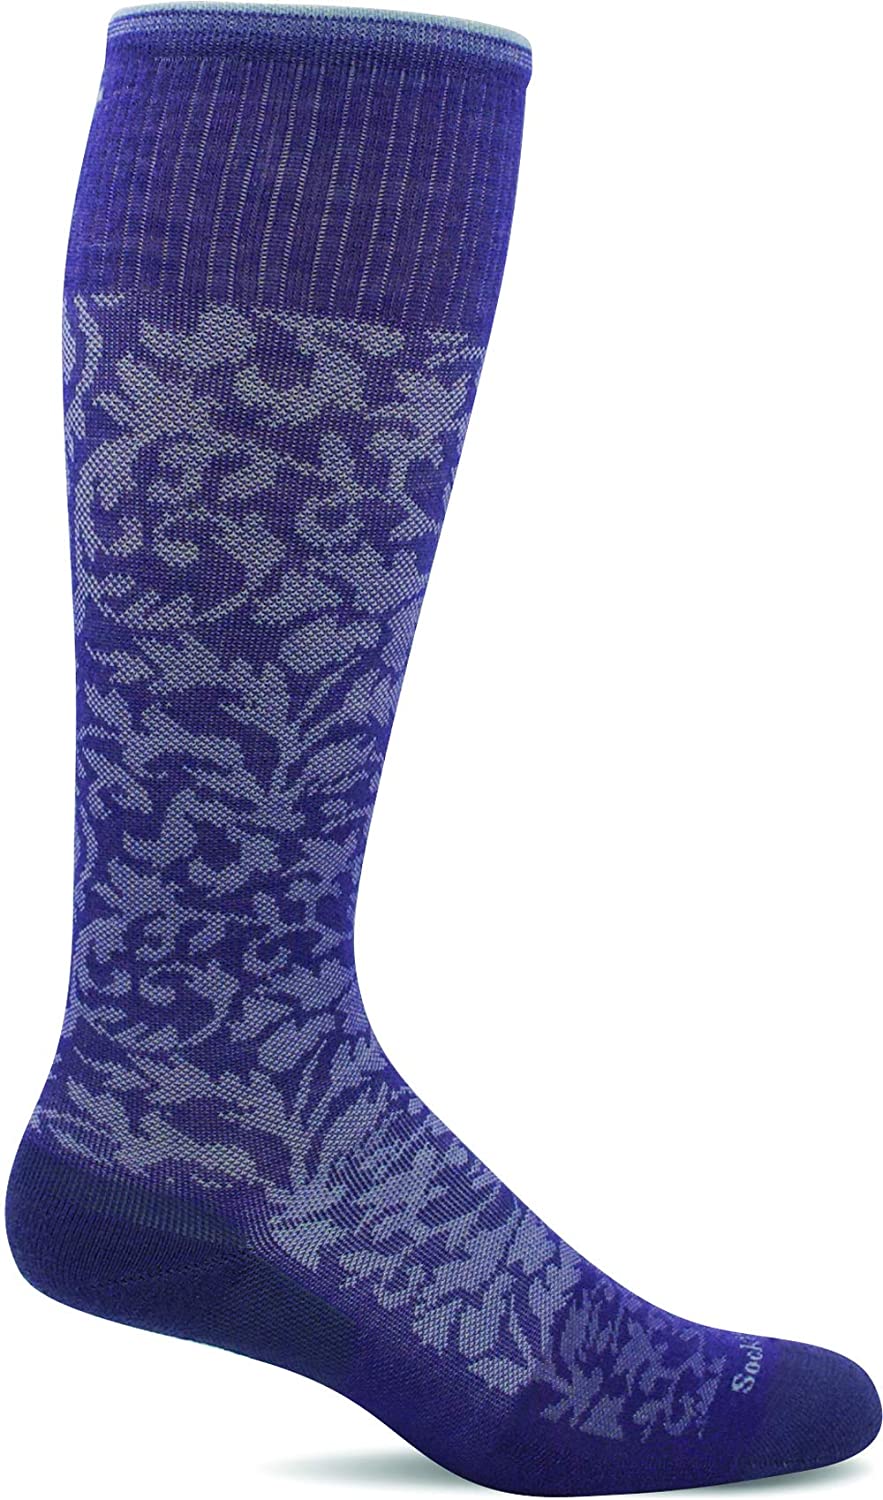 Sockwell Women's Damask Moderate Graduated Compression Sock in Plum from the side